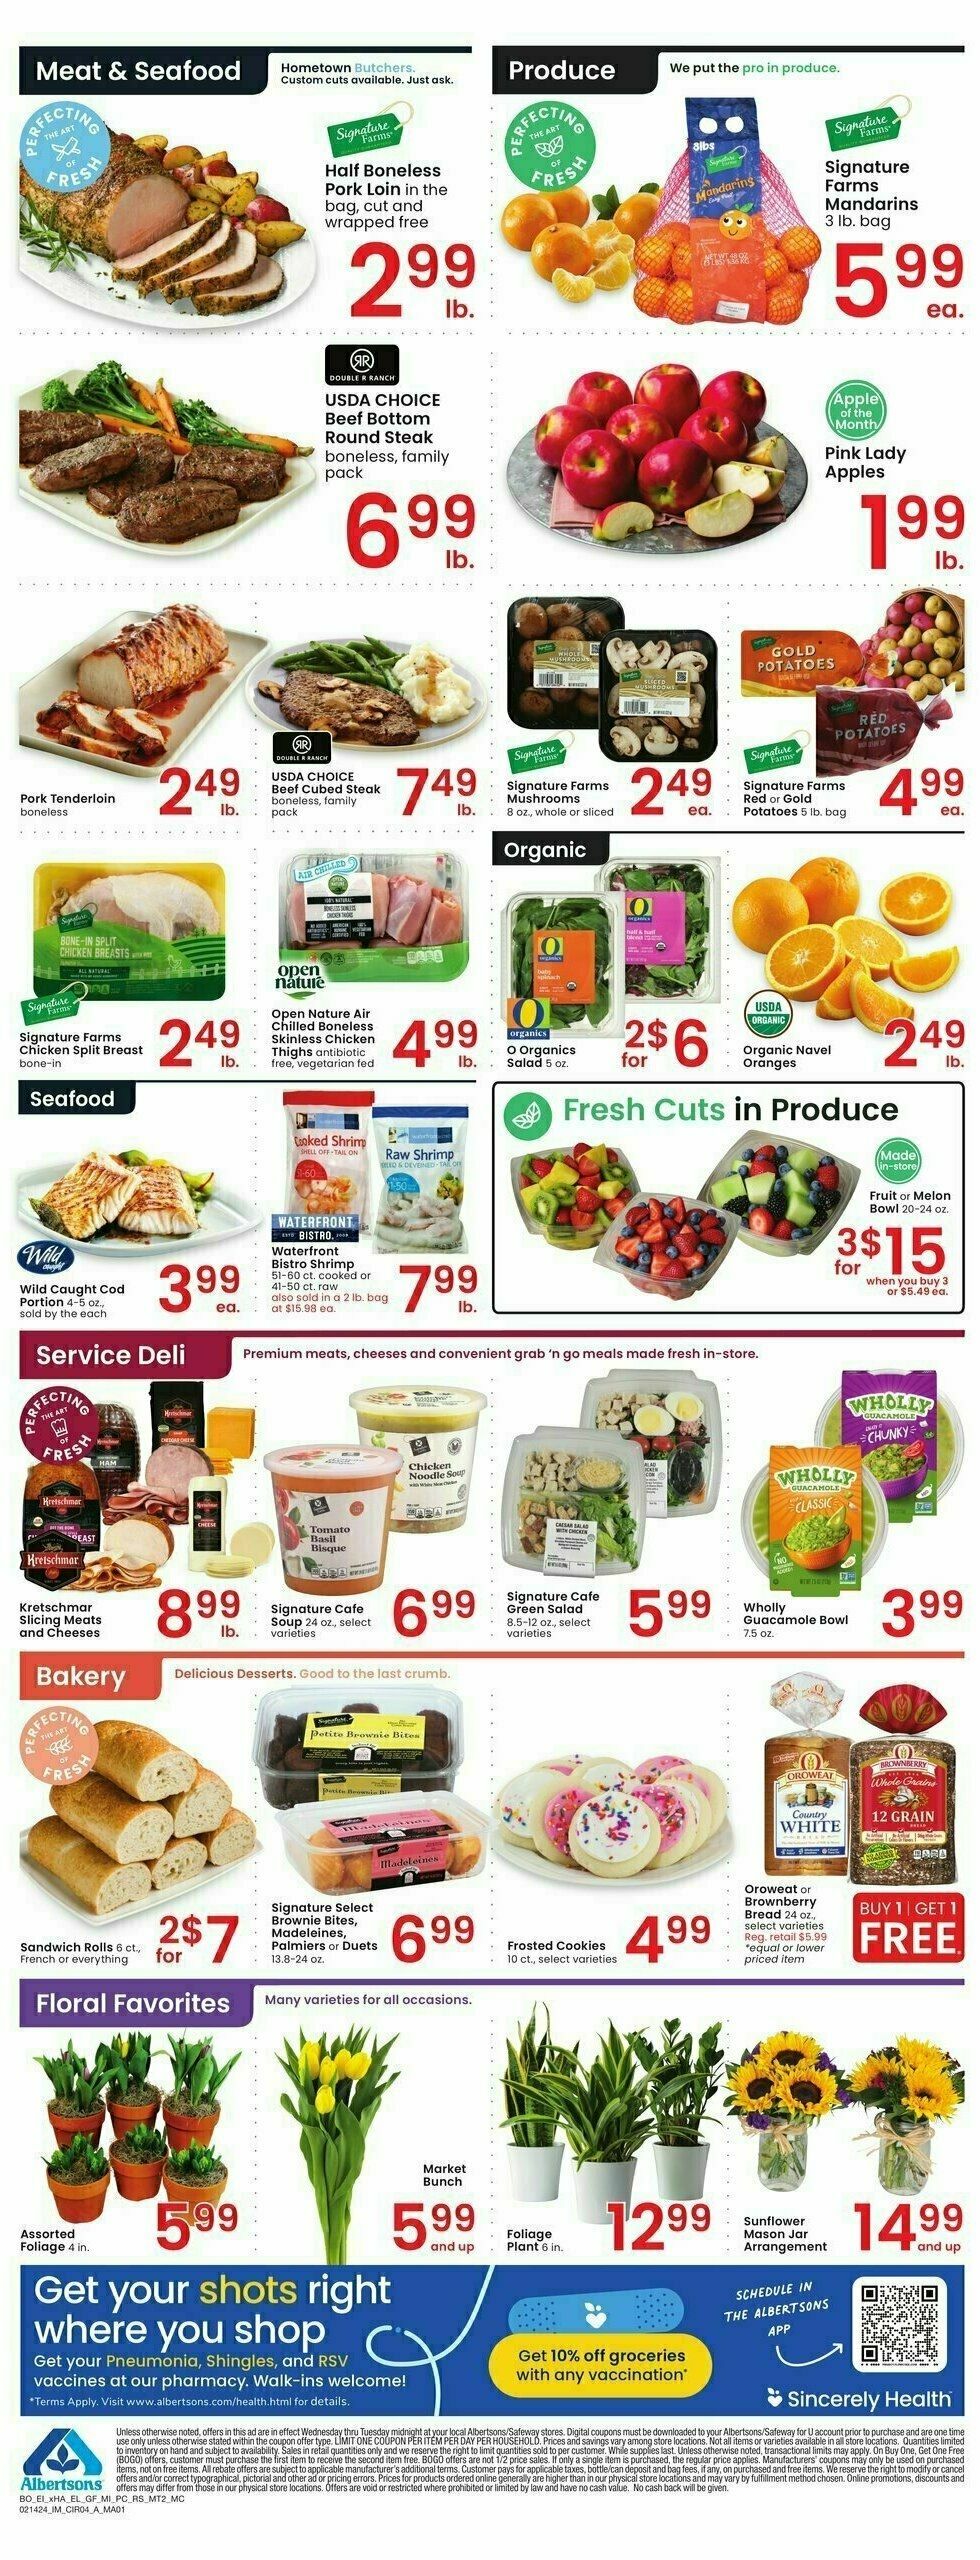 Albertsons Weekly Ad from February 14